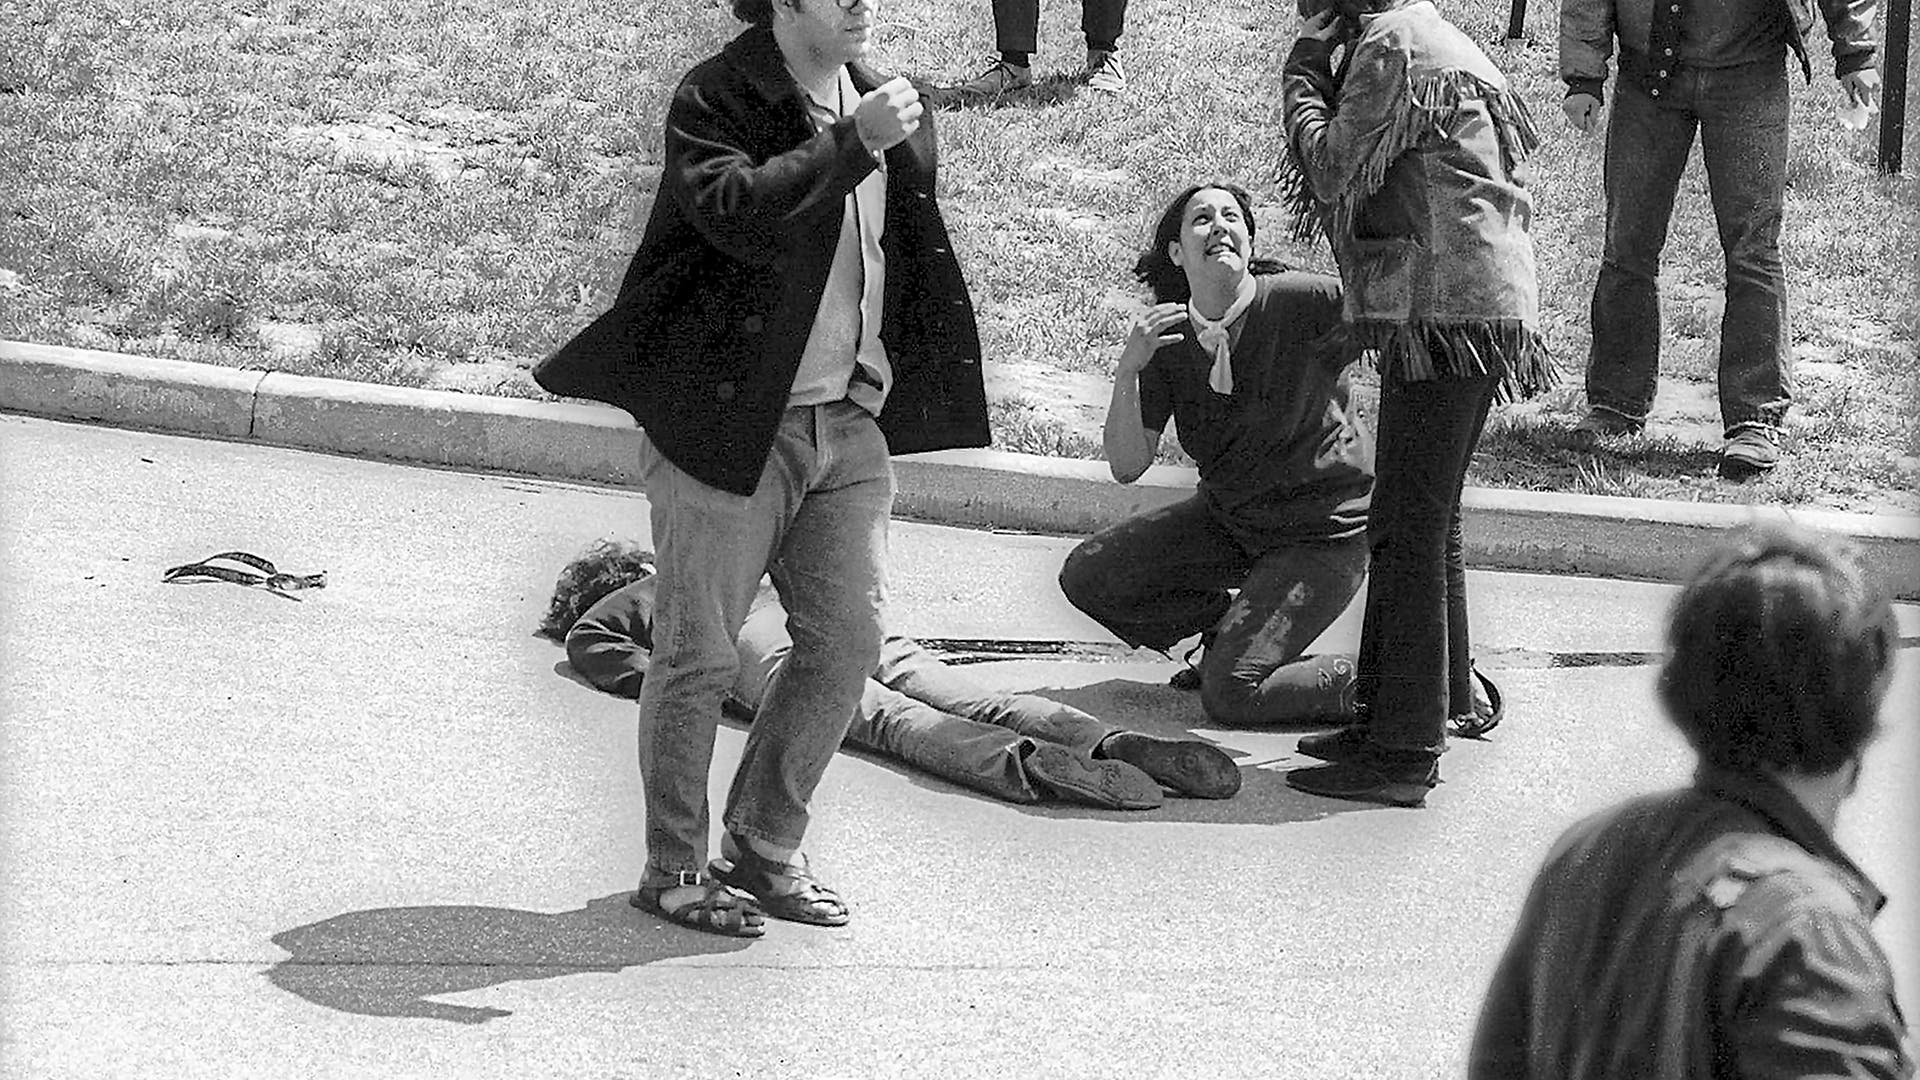 As others call for help, teenager Mary Ann Vecchio (center) kneels beside the body of Kent State University student Jeffrey Miller (1950 - 1970) who had been shot during an anti-war demonstration on the university campus, Kent, Ohio, May 4, 1970.